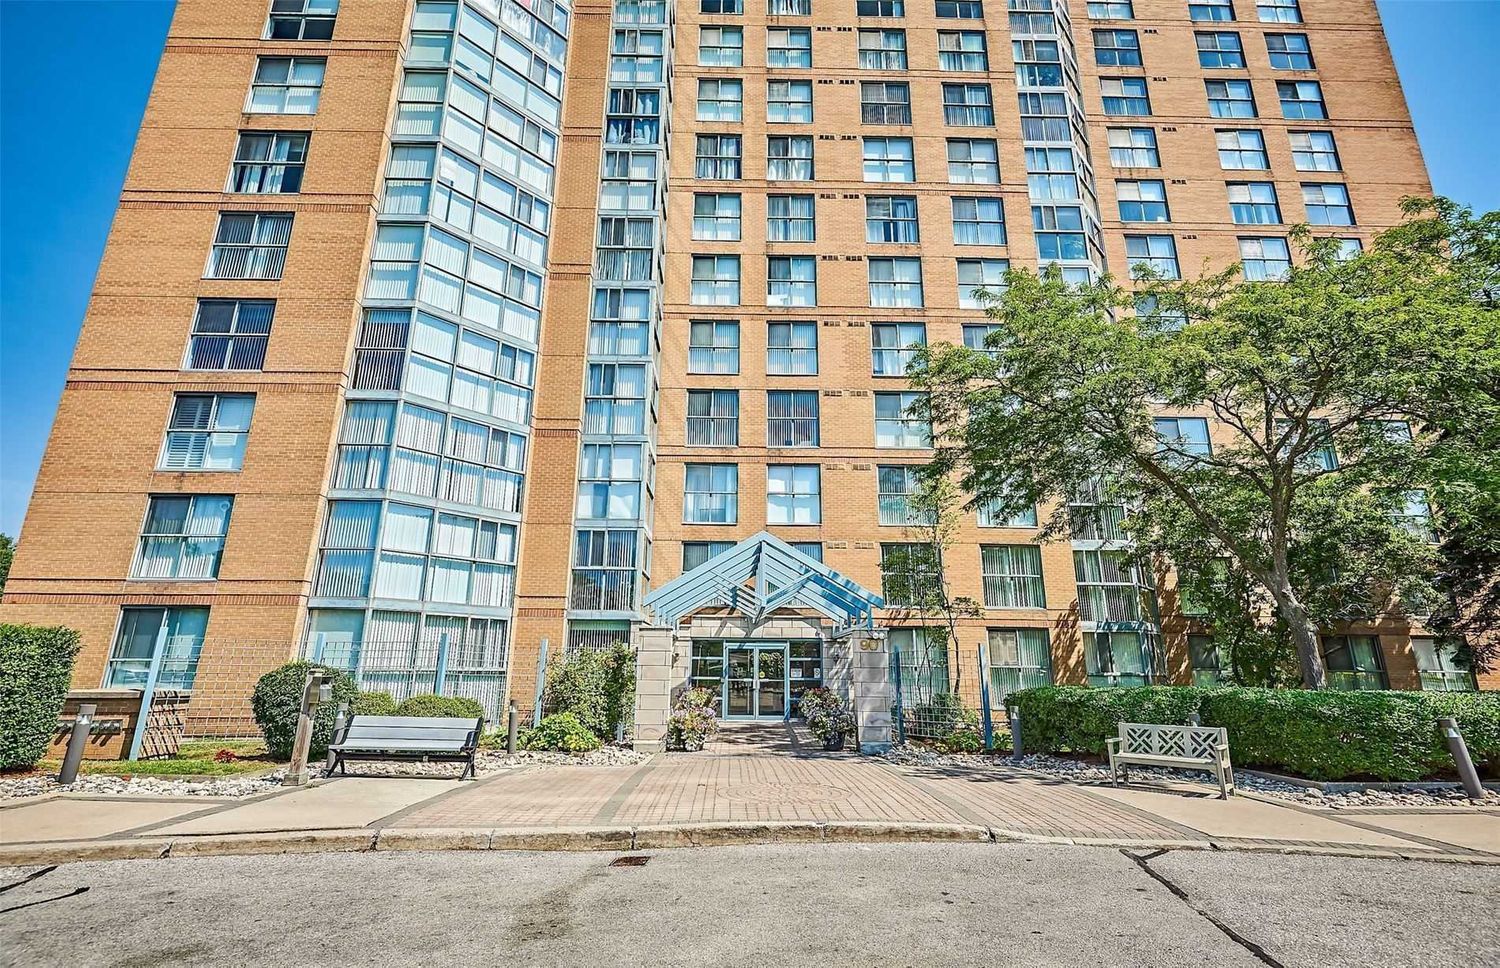 90 Dale Avenue. Prominence Point Condos is located in  Scarborough, Toronto - image #2 of 2